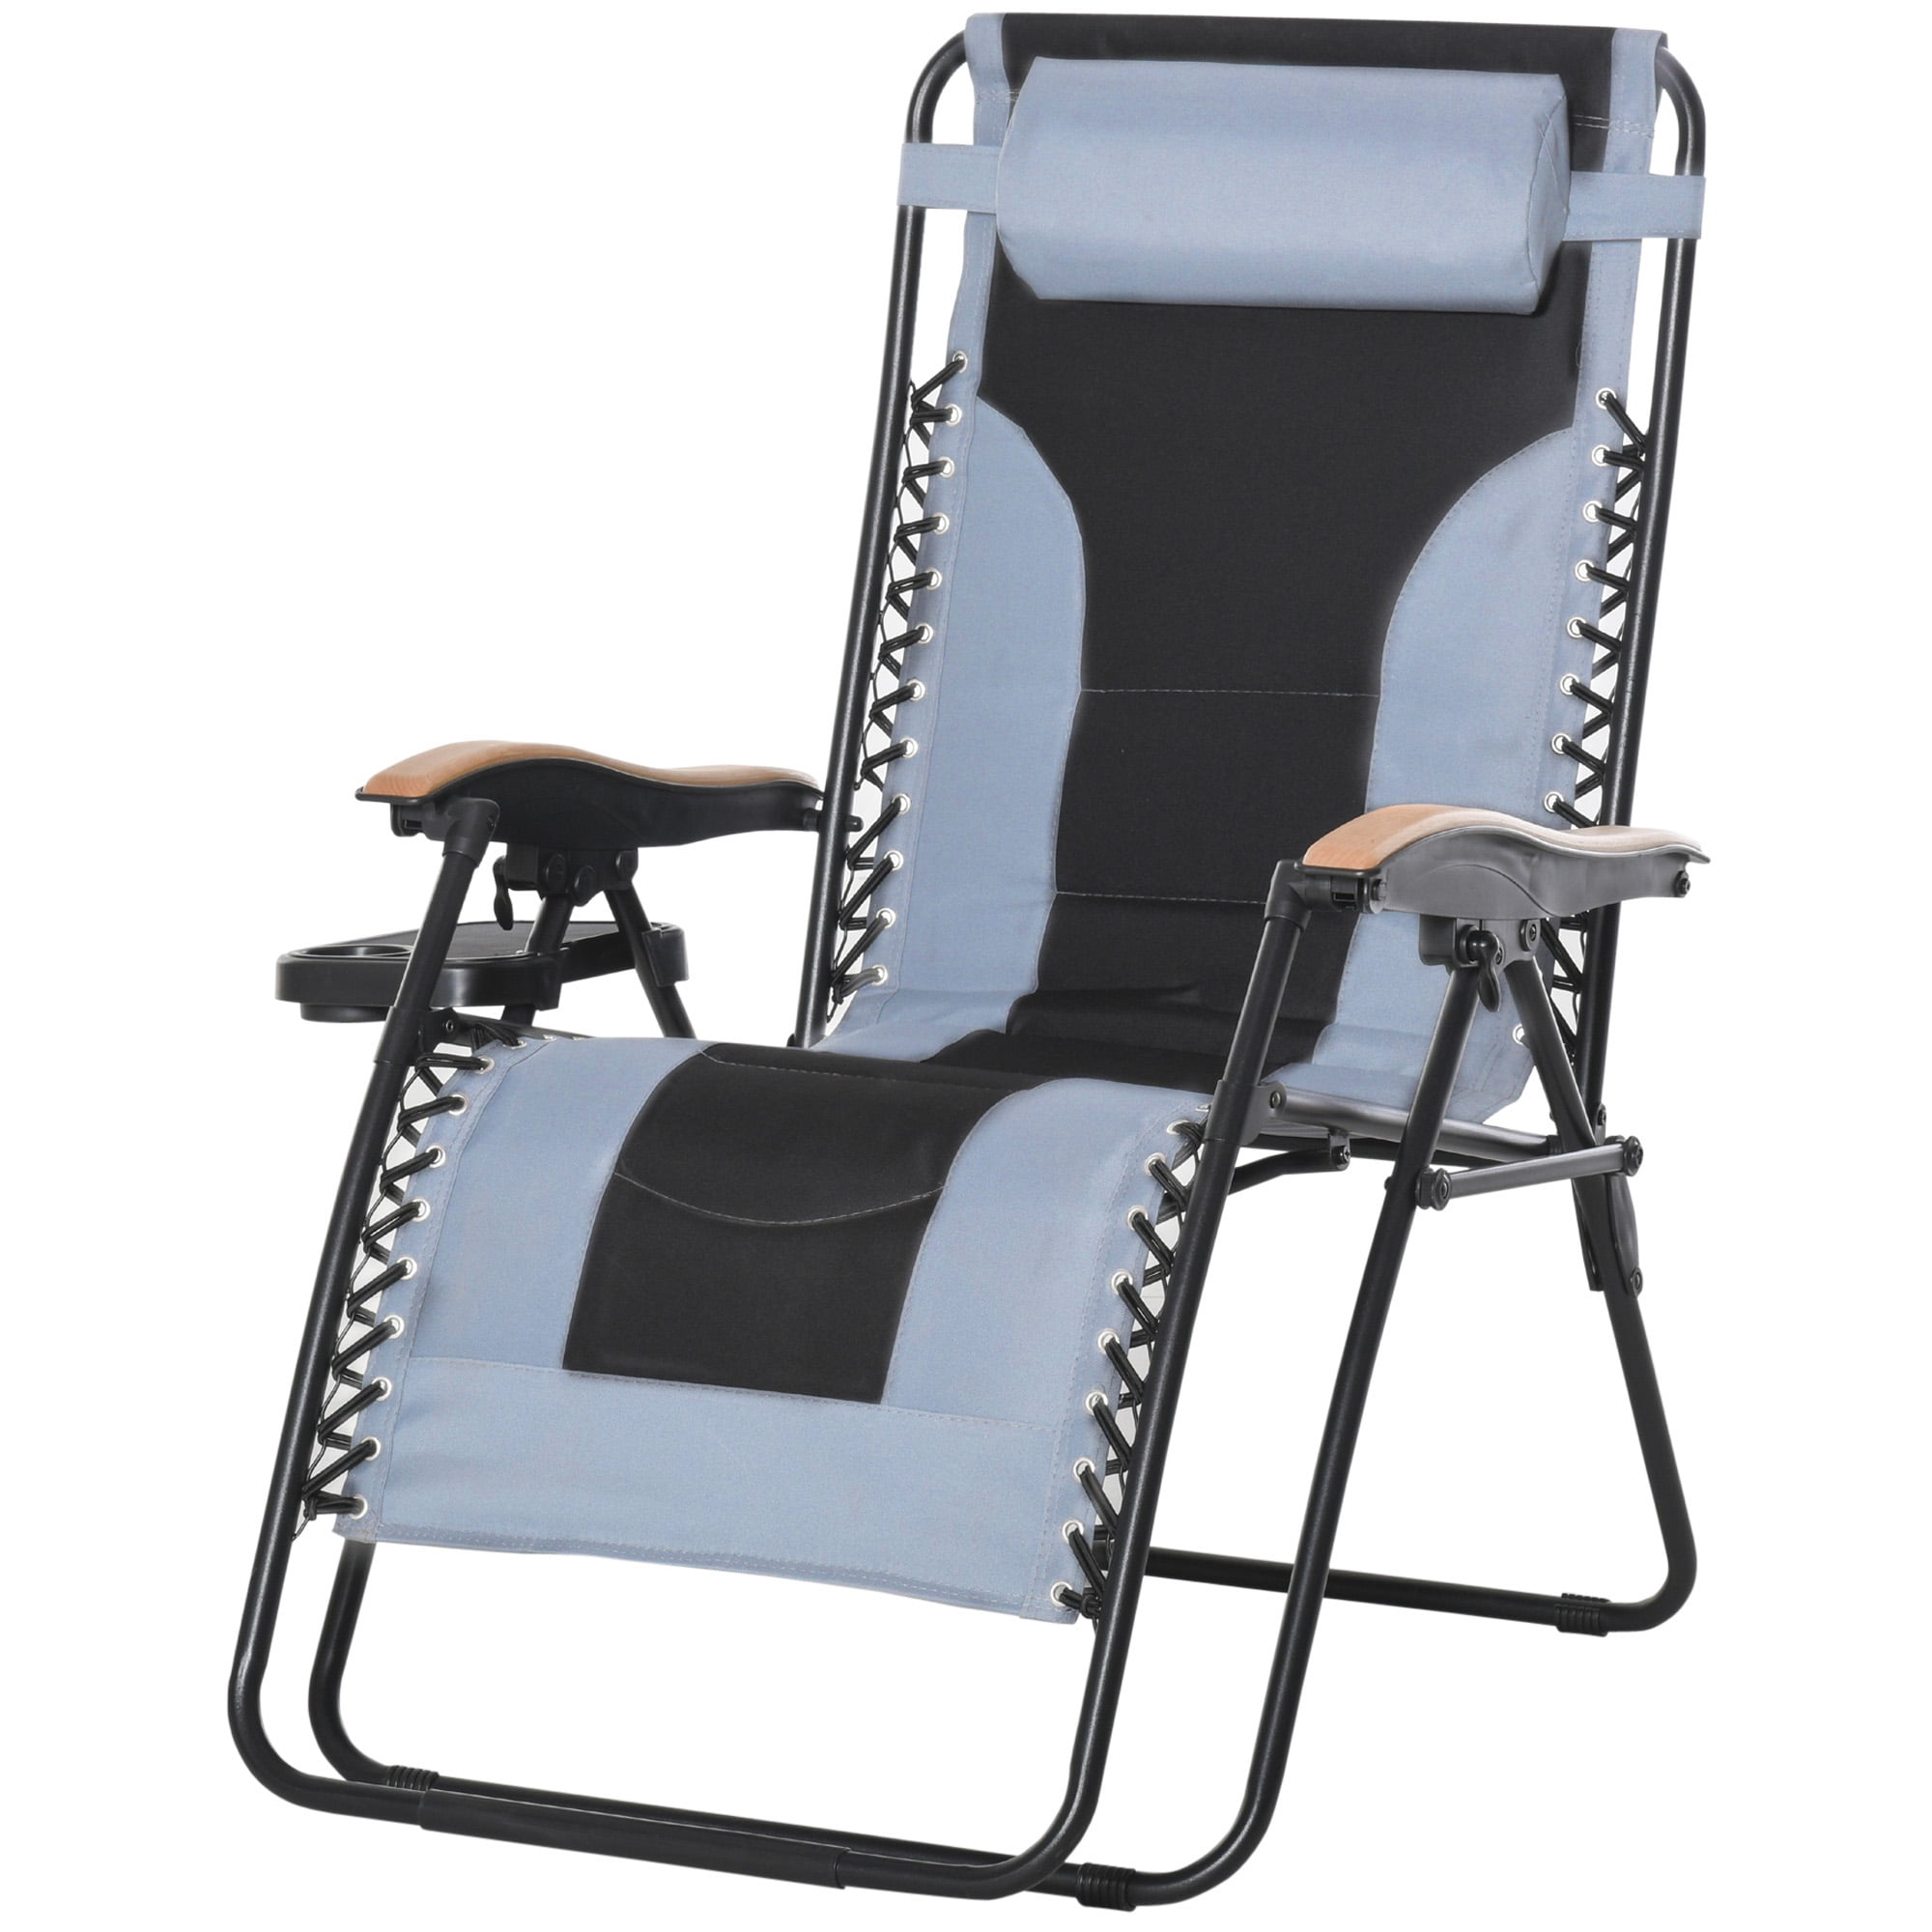 Details about   Outsunny Zero Gravity Lounge Chair Folding Patio Recliner with Cup Holder Tray 